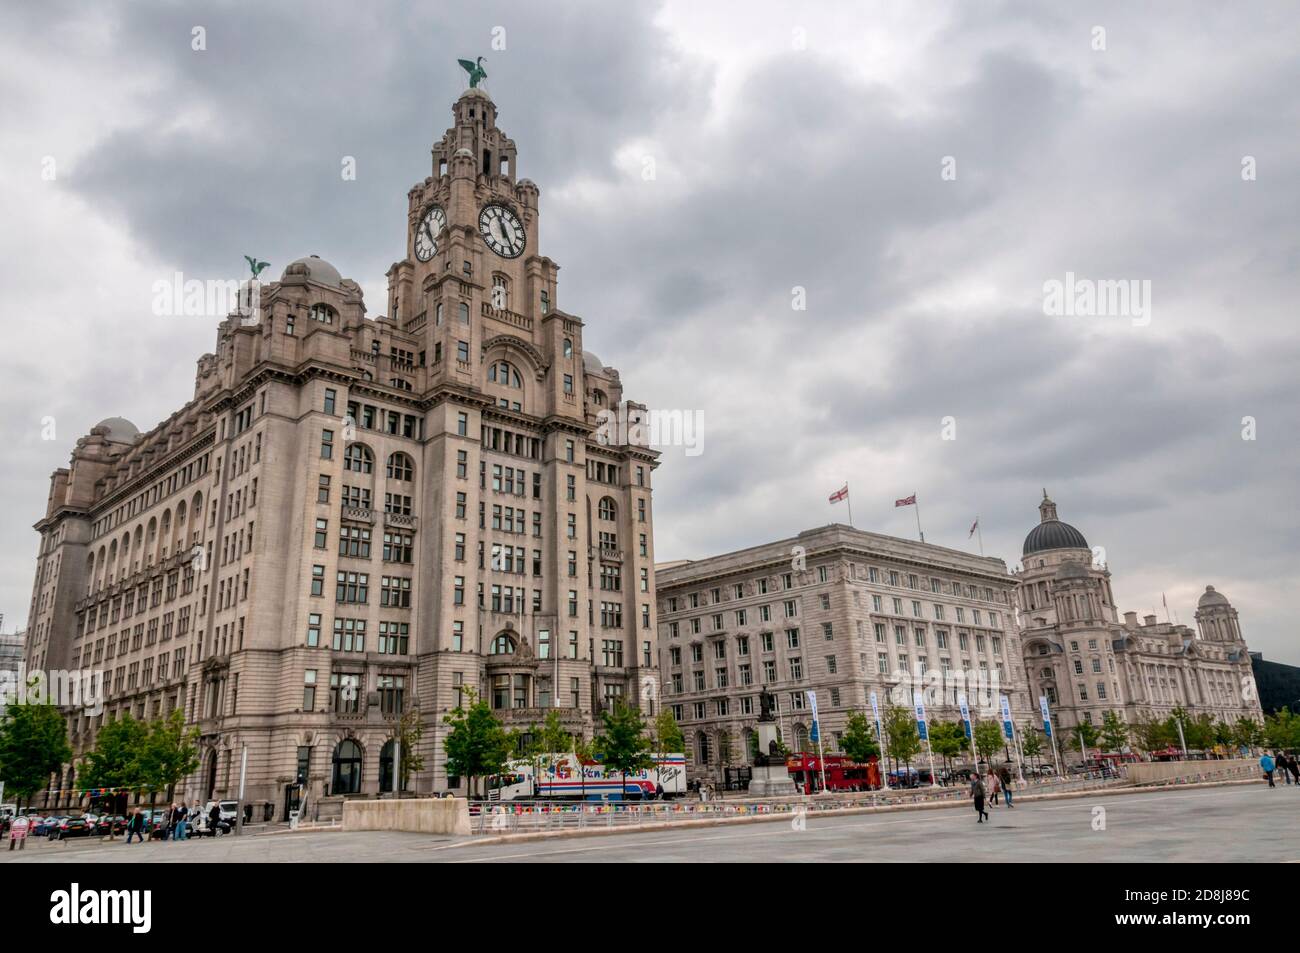 The Three Graces at Liverpool Pierhead.  Royal Liver Building, Cunard Building and Port of Liverpool Building. Stock Photo